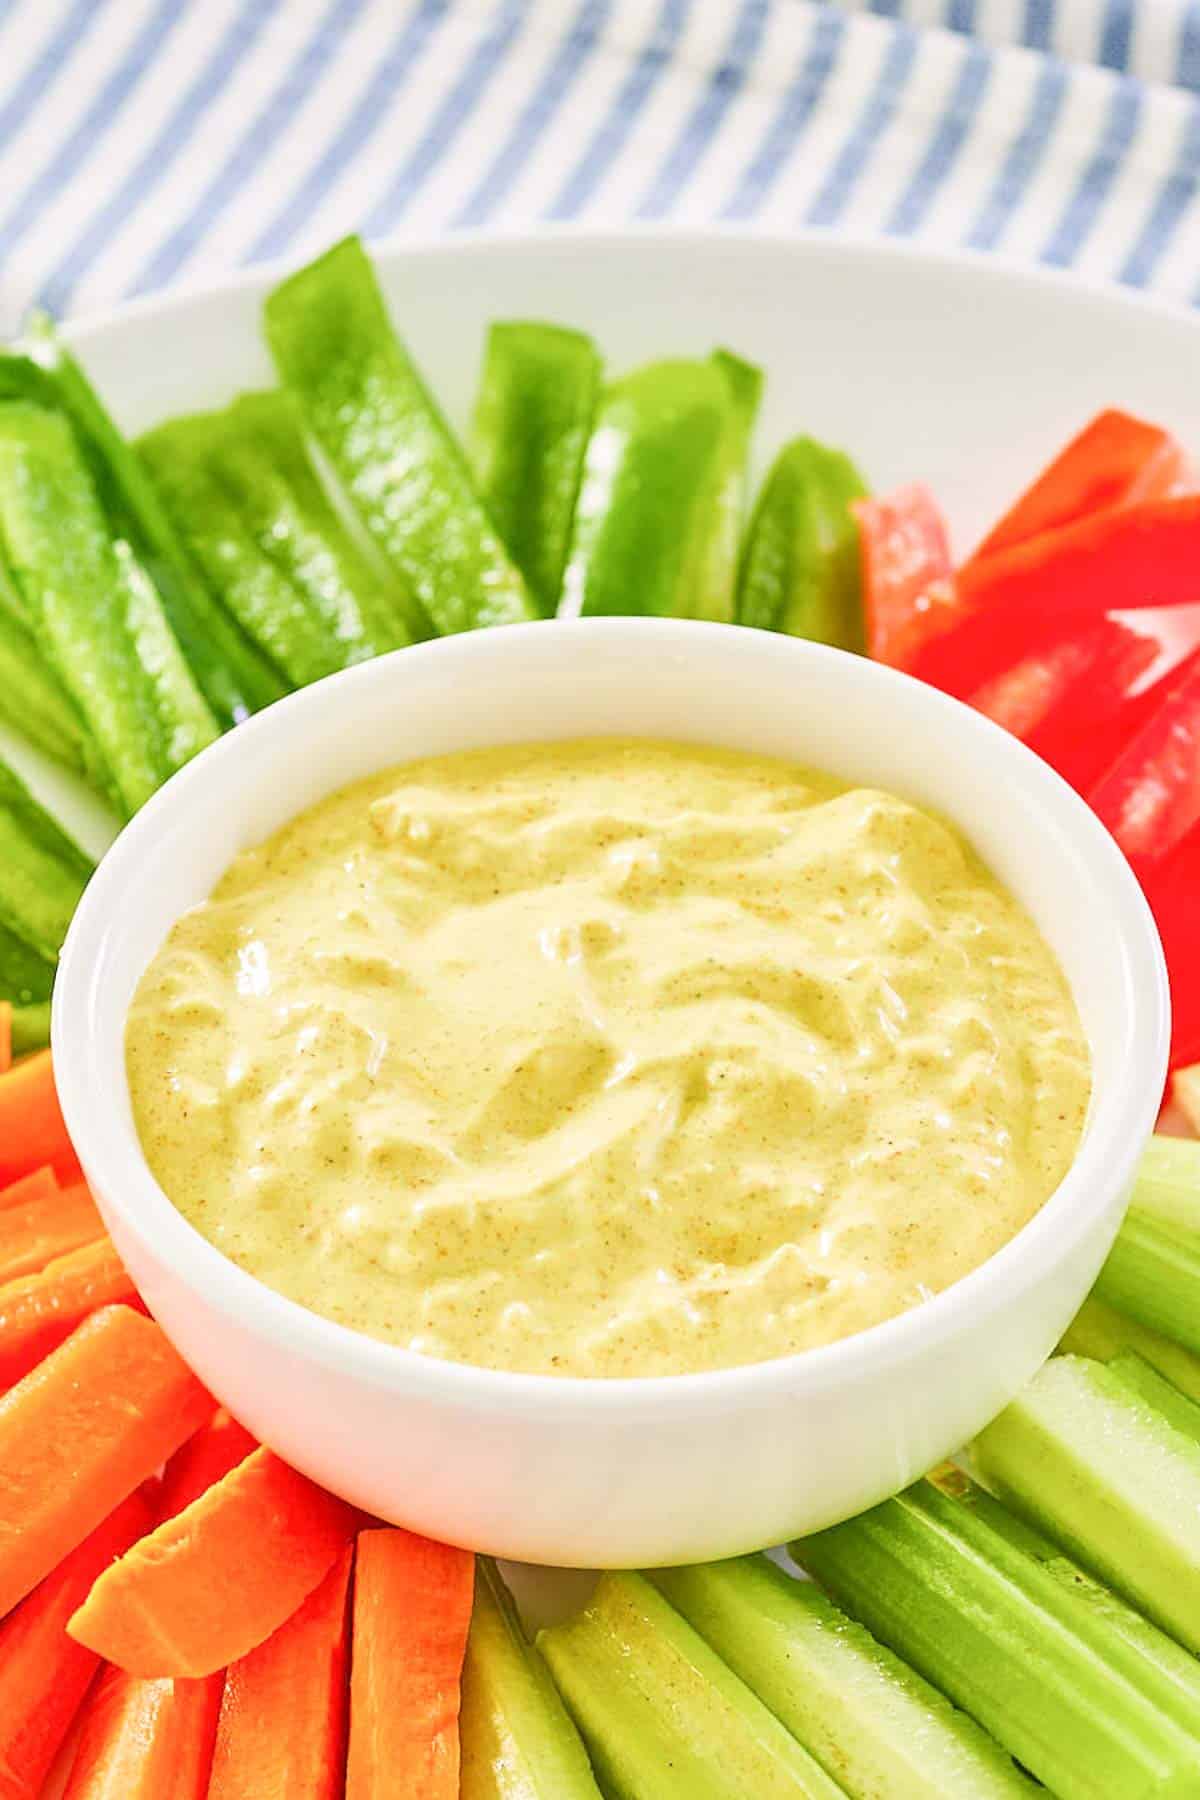 Curry dip in a bowl and vegetables around it on a platter.